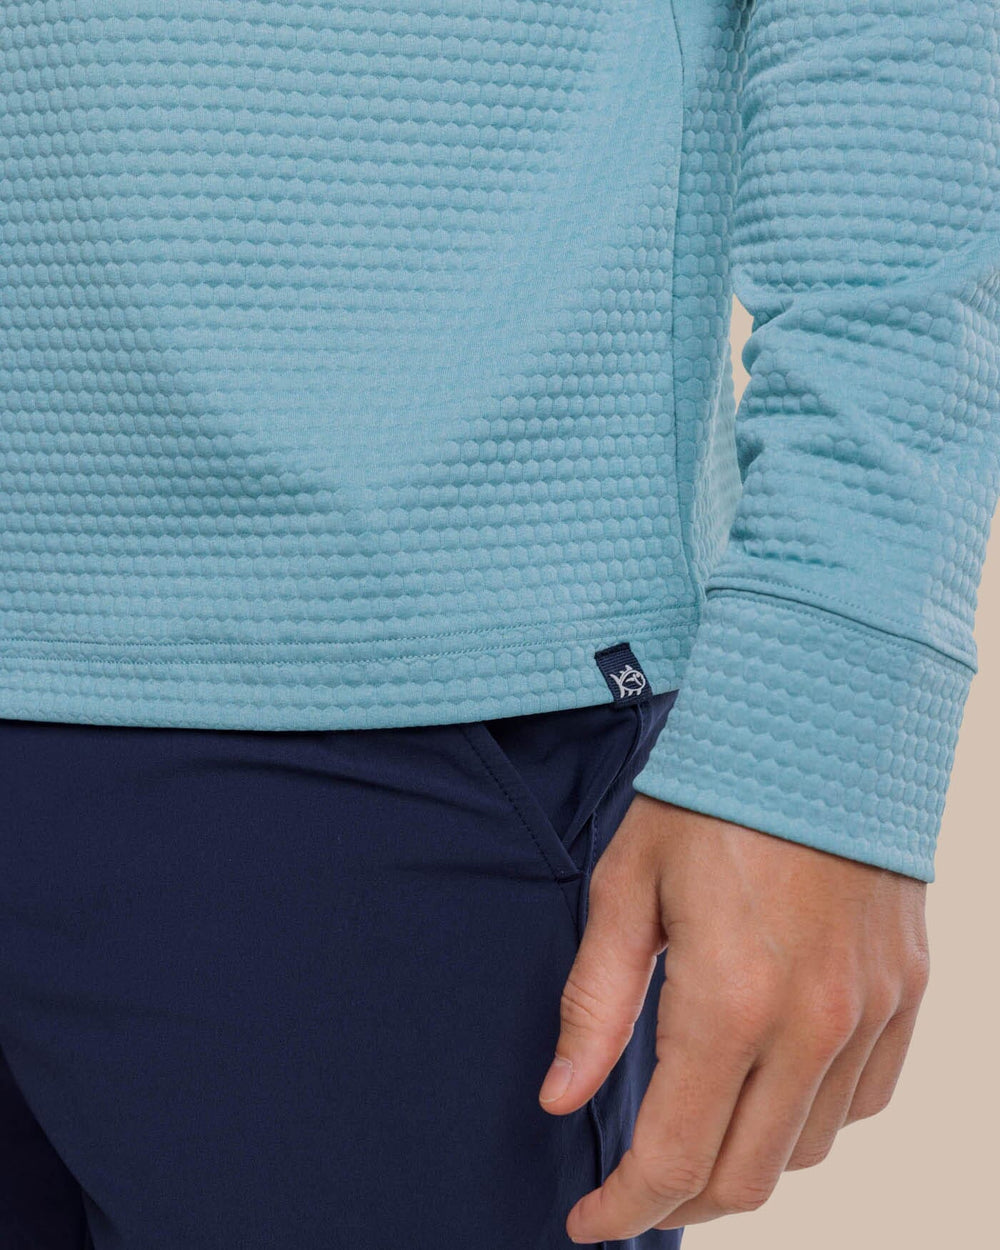 The detail view of the Southern Tide Scuttle Heather Performance Quarter Zip Hoodie by Southern Tide - Heather Ocean Teal